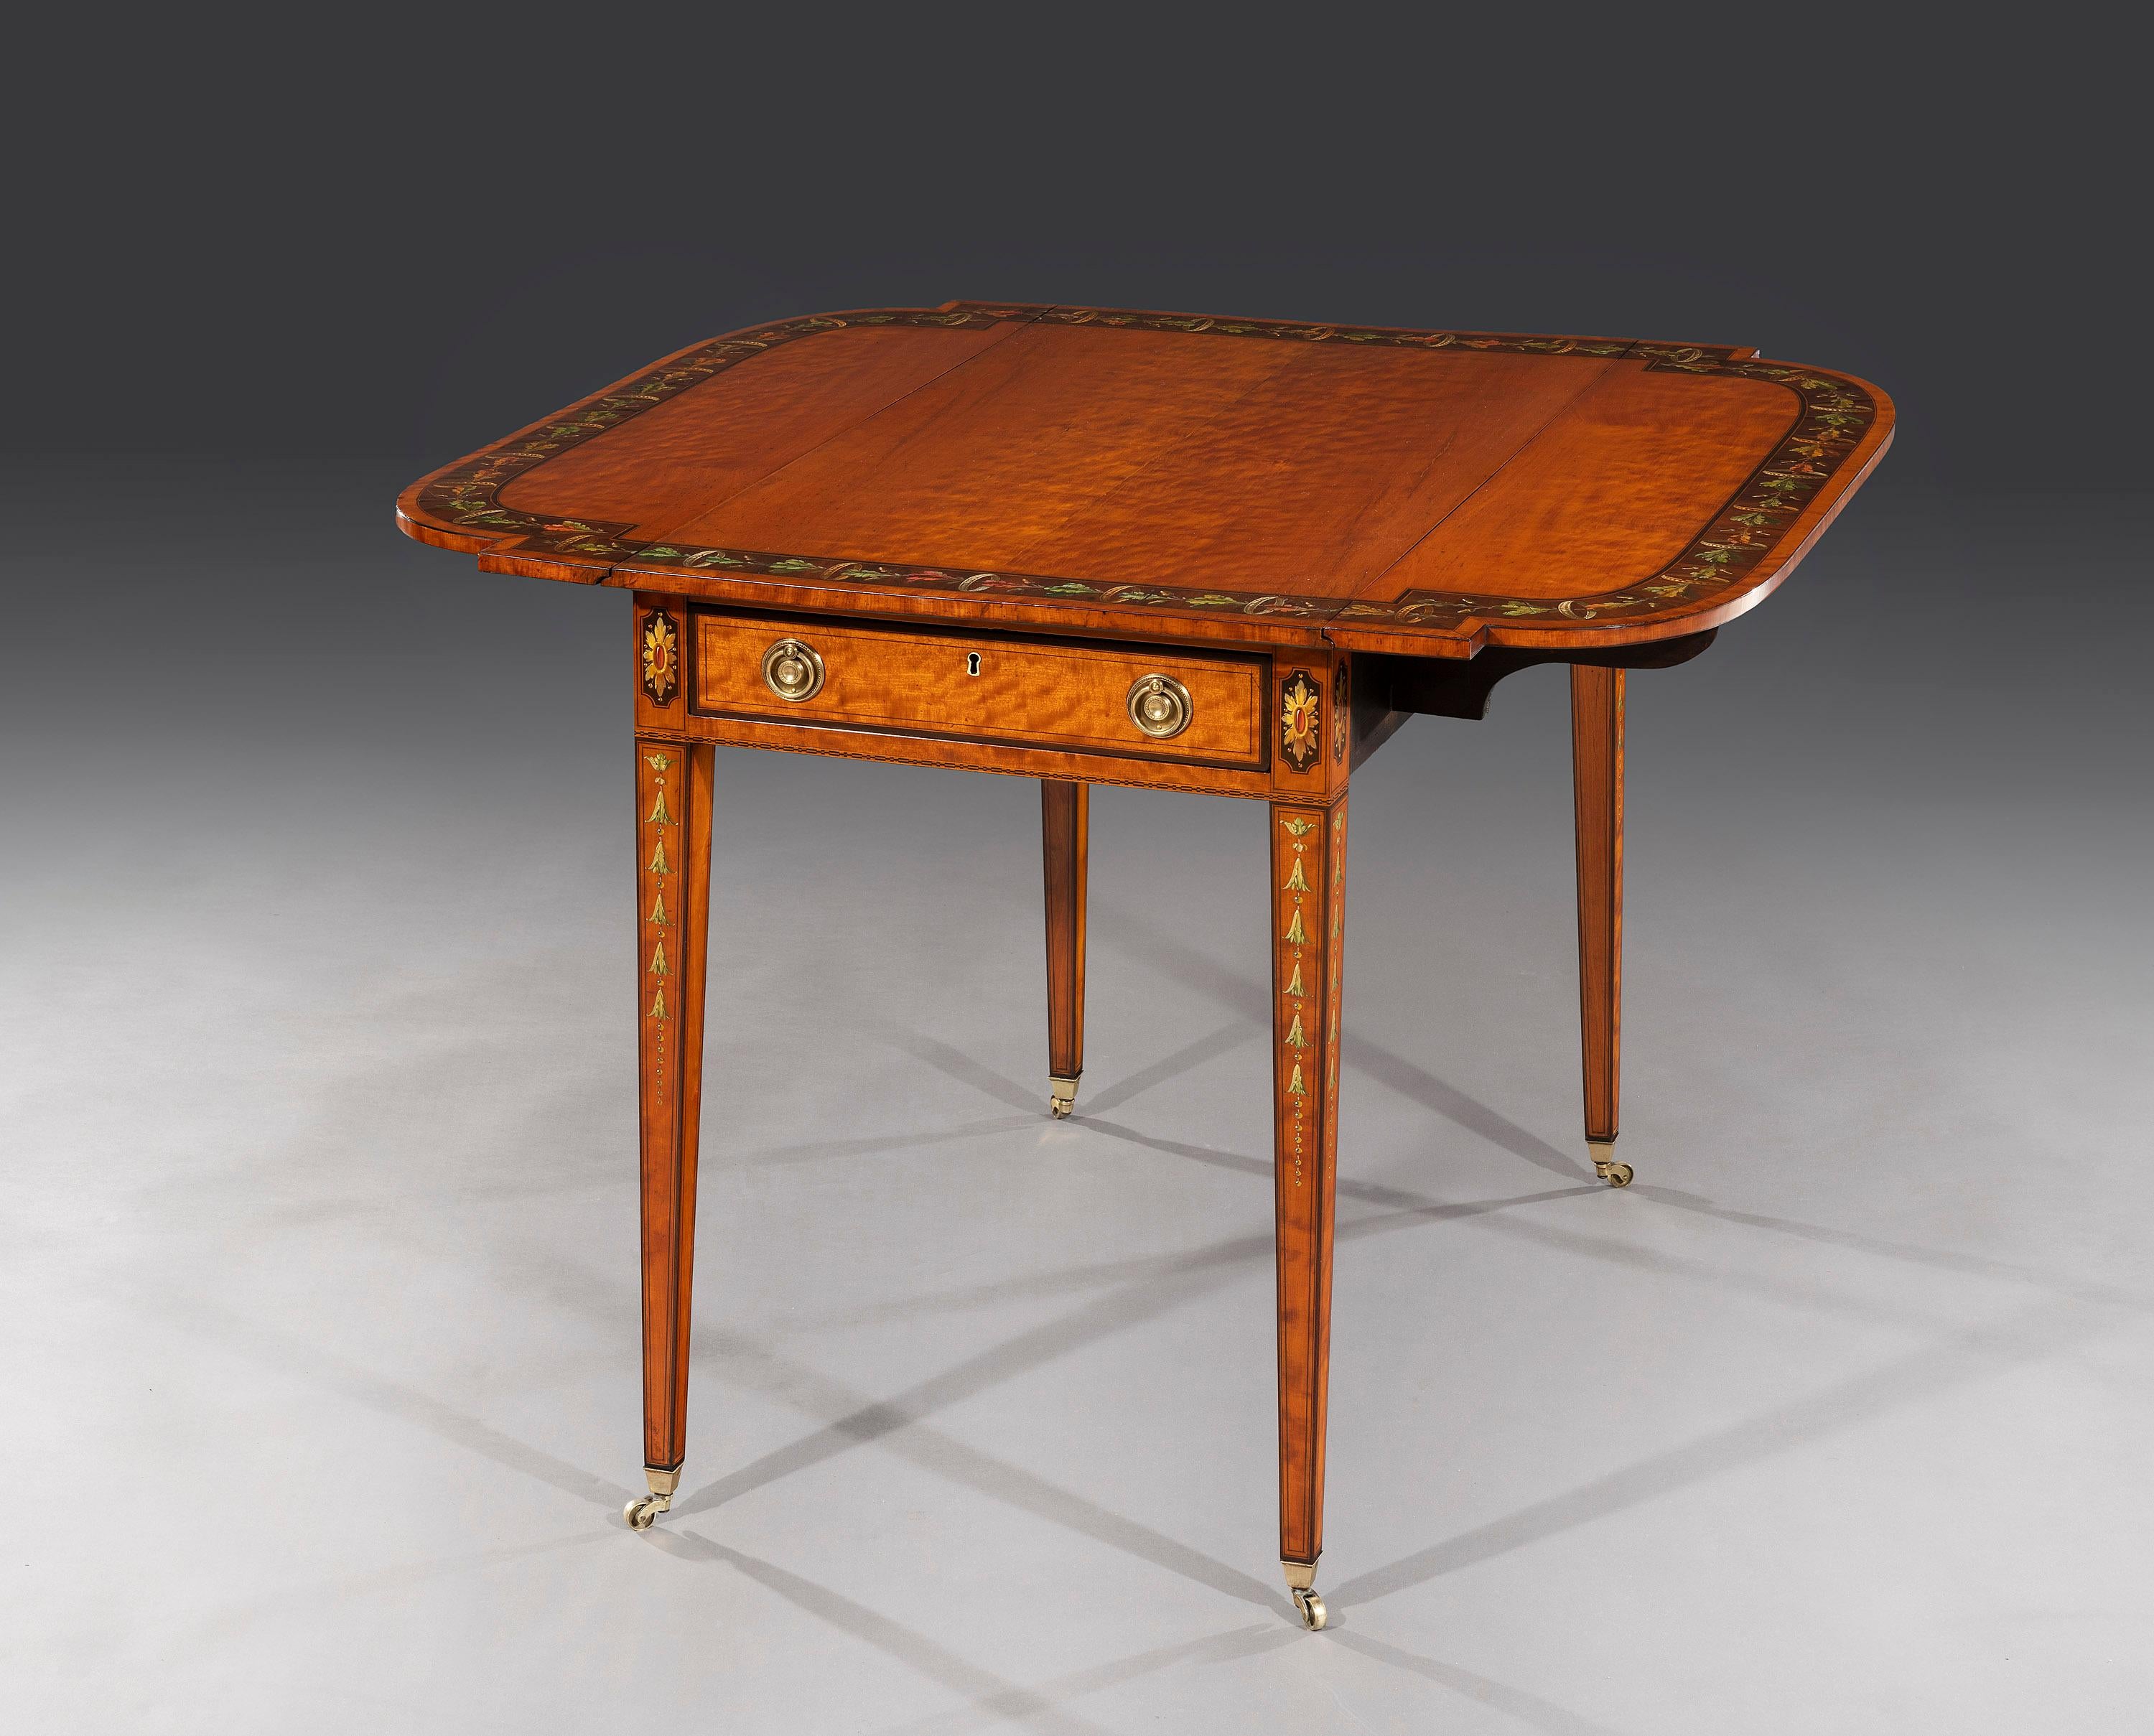 George III Sheraton Period 18th Century West Indian Satinwood Painted & Decorate In Good Condition For Sale In Bradford on Avon, GB